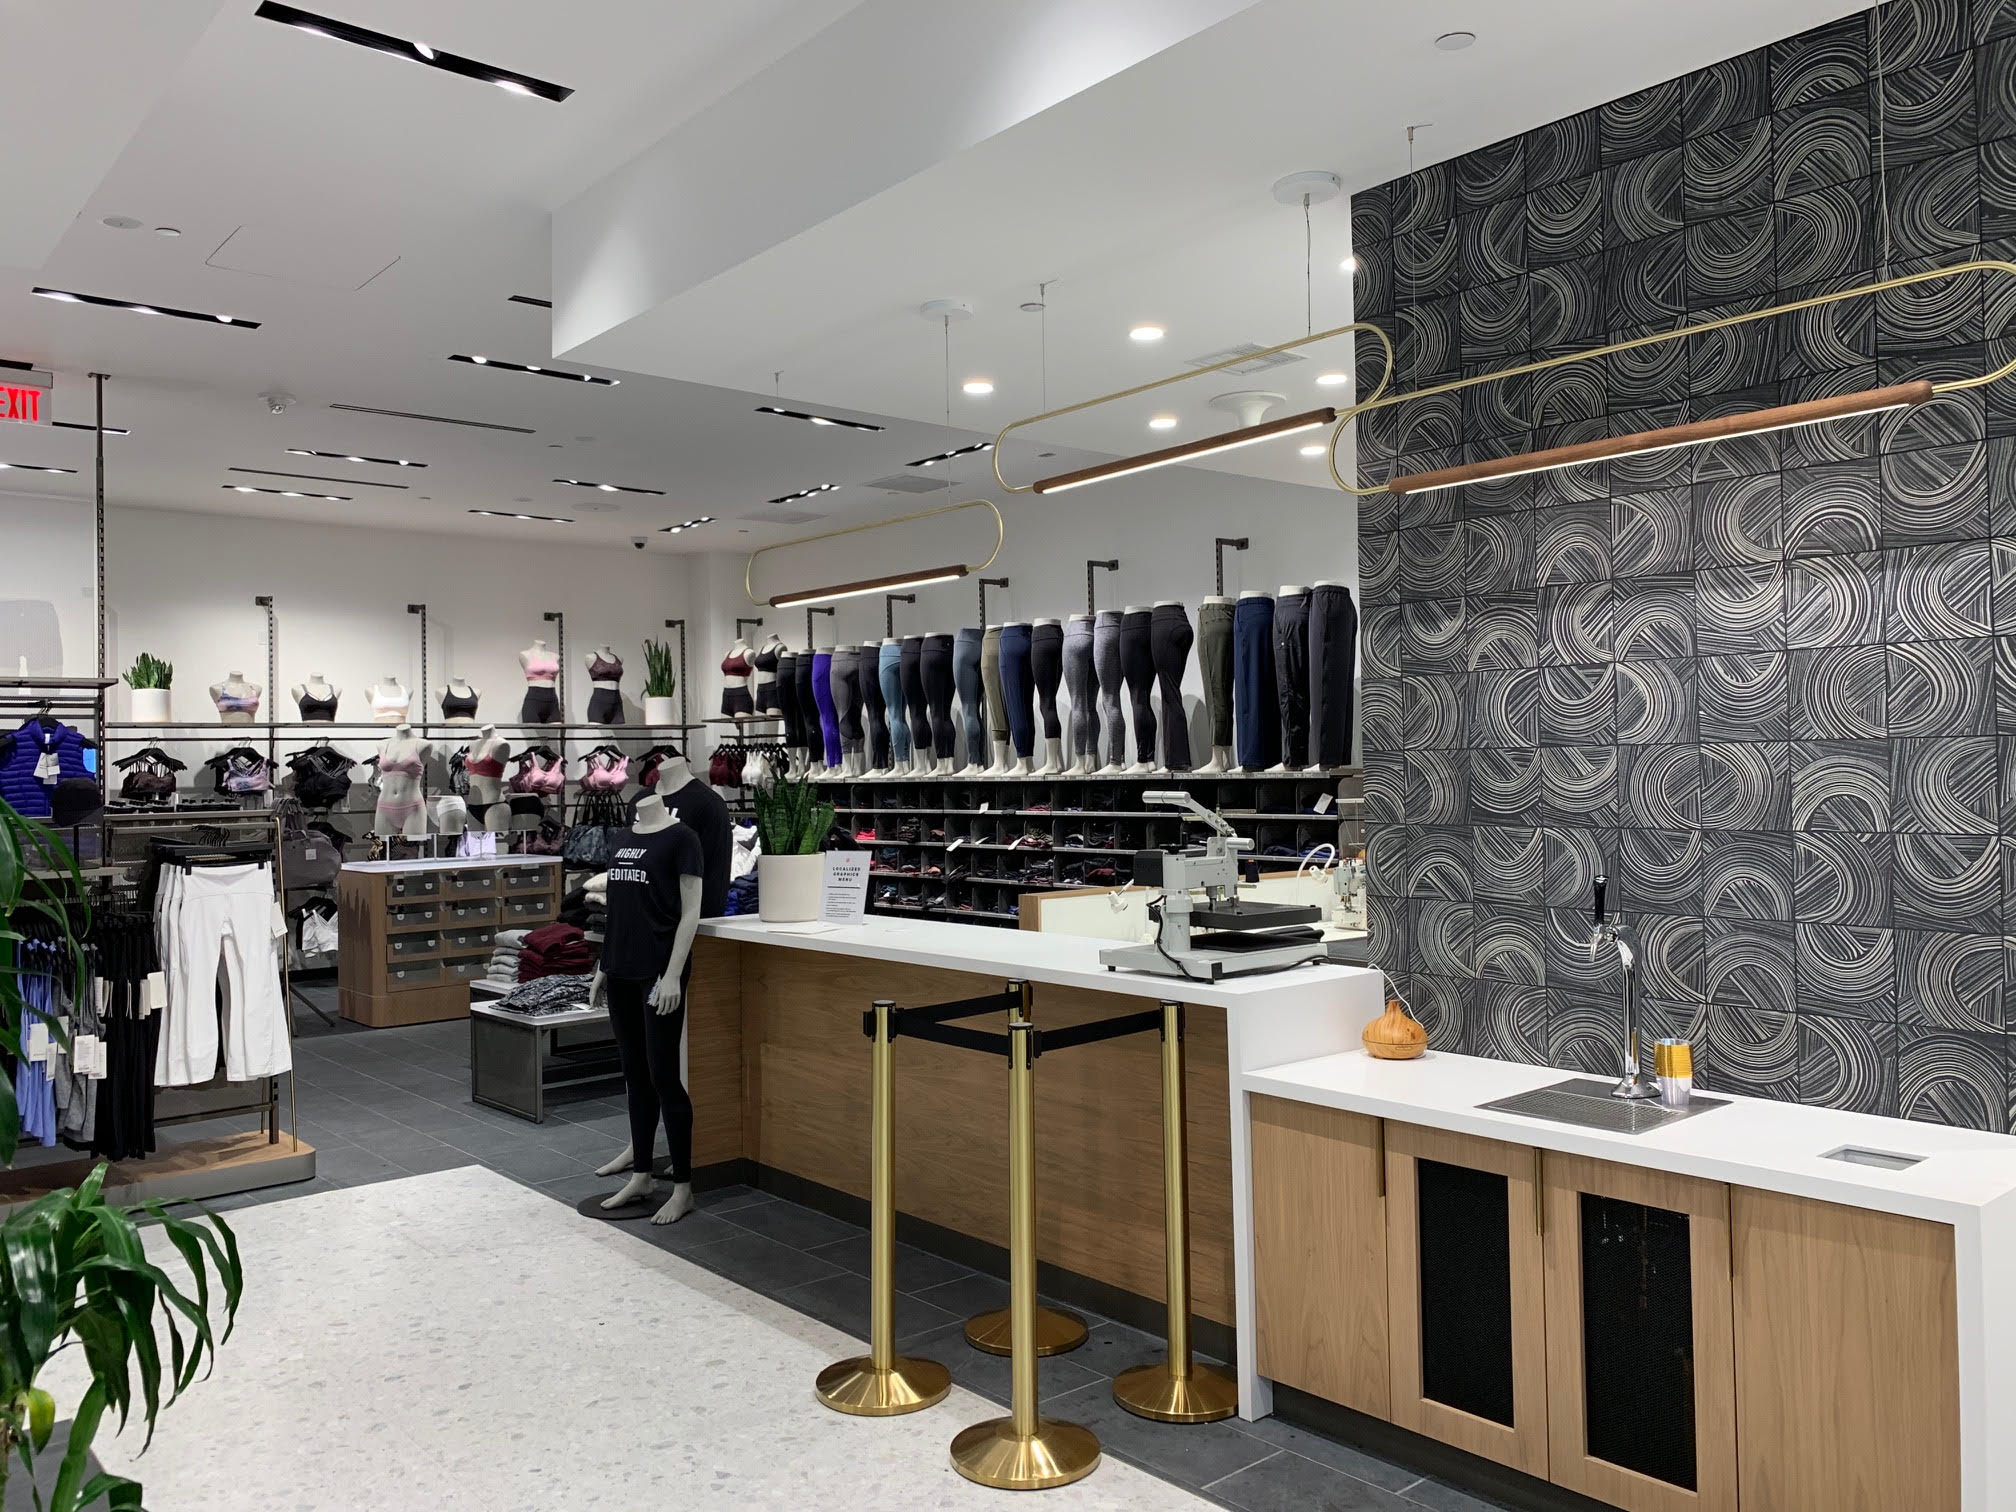 The new Lululemon boutique is now open - South Coast Plaza